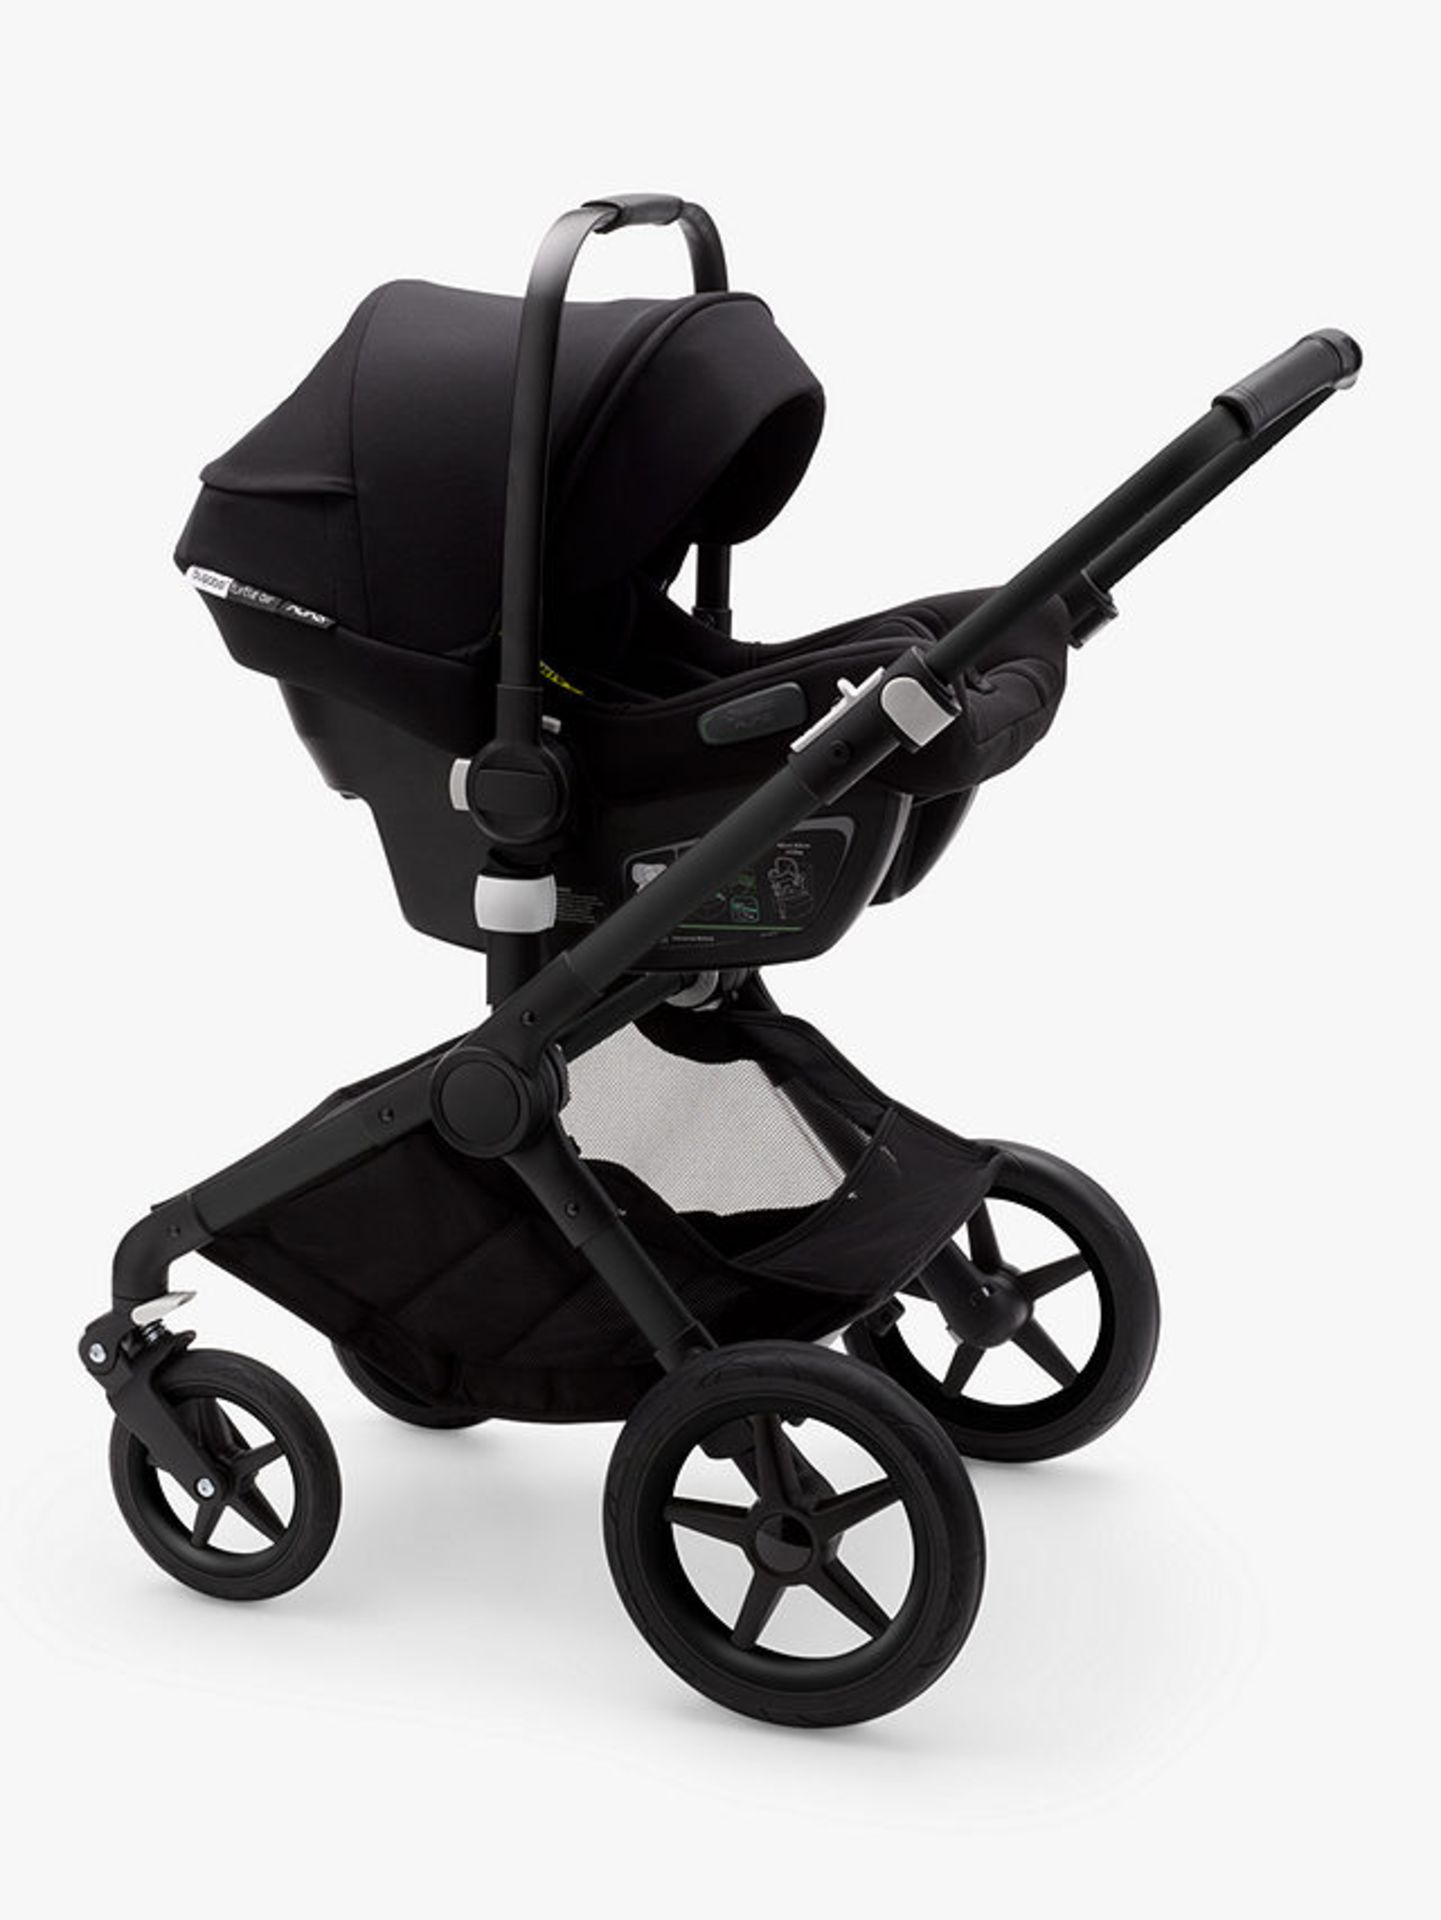 A1 PRODUCT NEW -   BUGABOO TURTLE AIR BY NUNA CAR SEAT IN BLACK - RRP Â£209 - Image 7 of 7